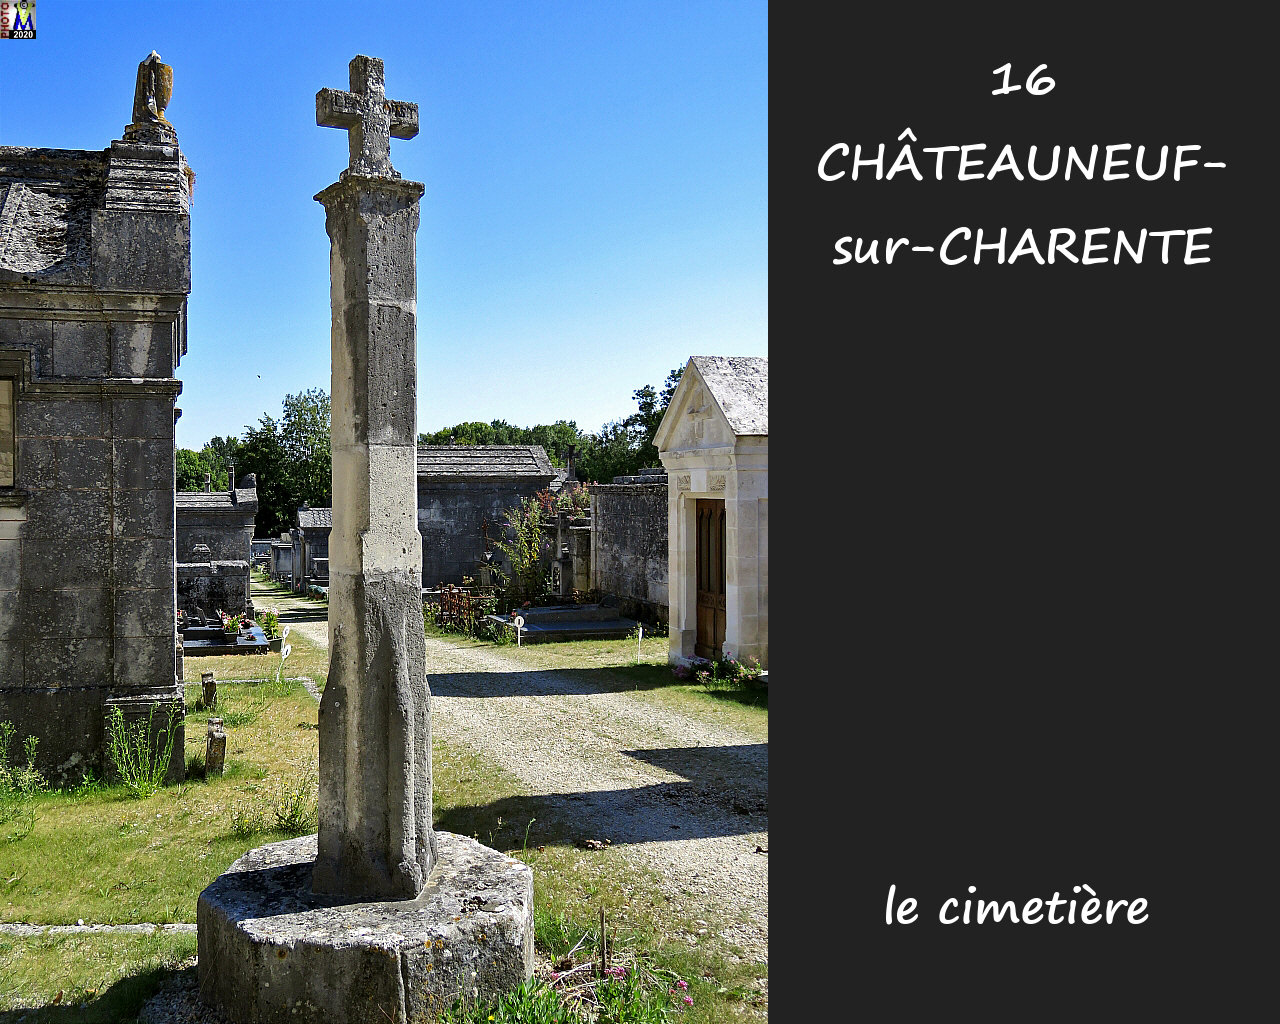 16CHATEAUNEUF-CH_cimetiere_1002.jpg